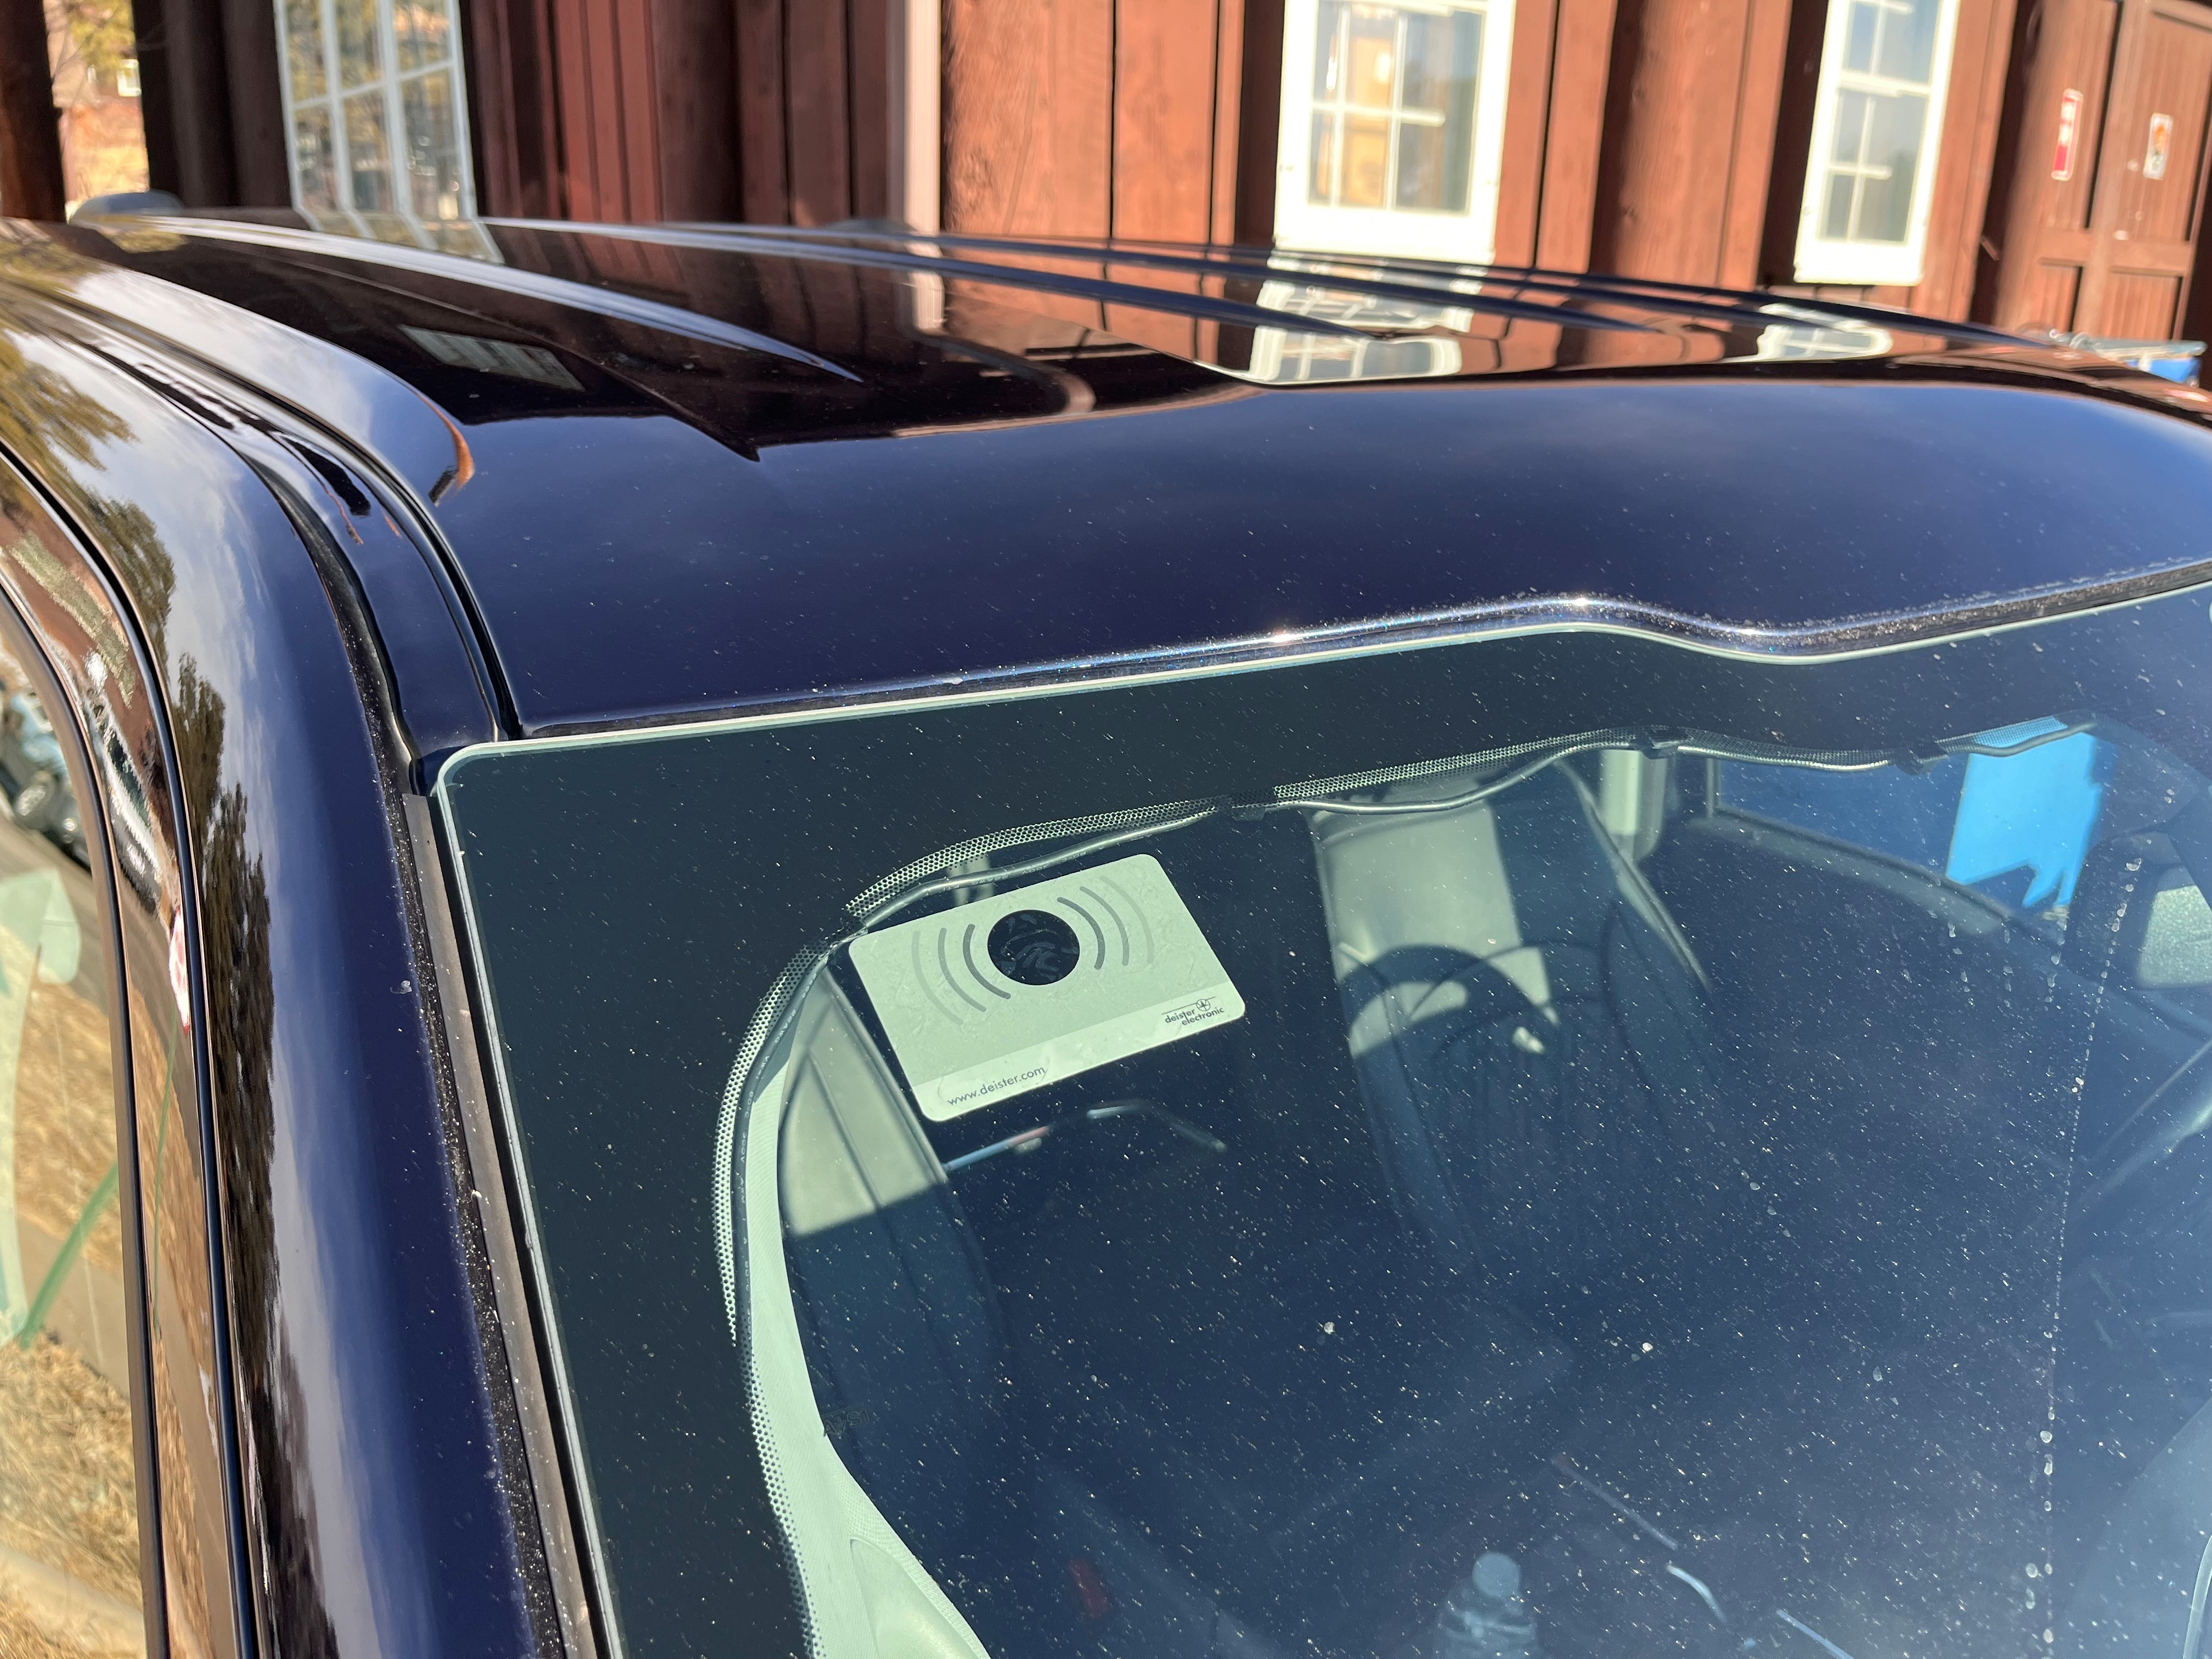 A transponder has been correctly placed on the upper passenger side of a vehicle's window